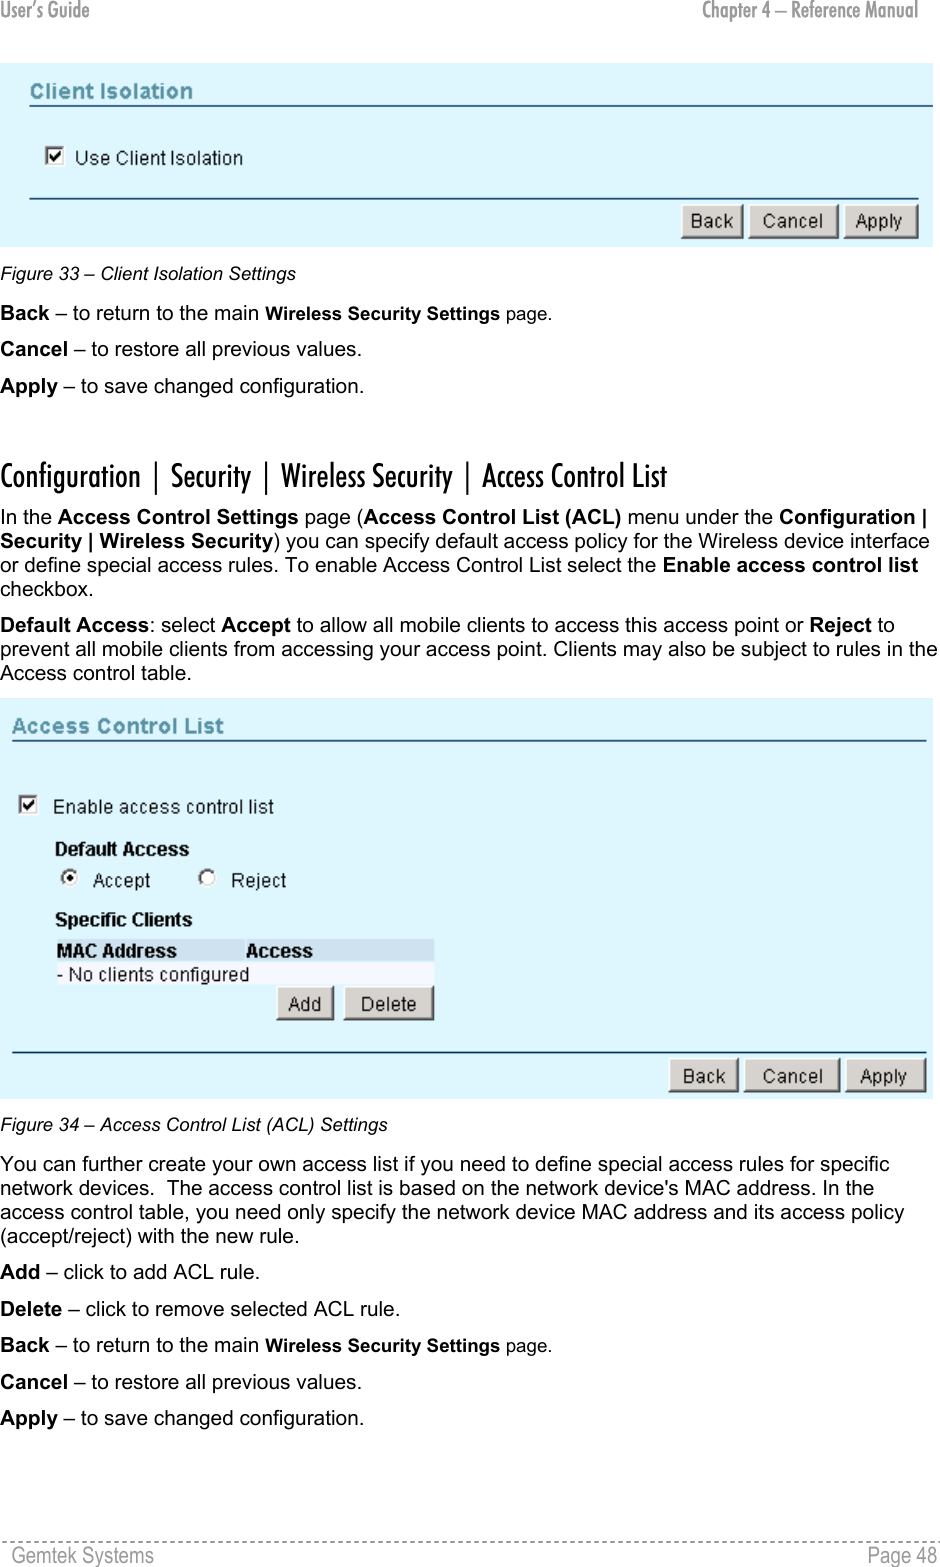 User’s Guide  Chapter 4 – Reference Manual  Figure 33 – Client Isolation Settings Back – to return to the main Wireless Security Settings page. Cancel – to restore all previous values. Apply – to save changed configuration.  Configuration | Security | Wireless Security | Access Control List In the Access Control Settings page (Access Control List (ACL) menu under the Configuration | Security | Wireless Security) you can specify default access policy for the Wireless device interface or define special access rules. To enable Access Control List select the Enable access control list checkbox. Default Access: select Accept to allow all mobile clients to access this access point or Reject to prevent all mobile clients from accessing your access point. Clients may also be subject to rules in the Access control table.   Figure 34 – Access Control List (ACL) Settings You can further create your own access list if you need to define special access rules for specific network devices.  The access control list is based on the network device&apos;s MAC address. In the access control table, you need only specify the network device MAC address and its access policy (accept/reject) with the new rule. Add – click to add ACL rule. Delete – click to remove selected ACL rule. Back – to return to the main Wireless Security Settings page. Cancel – to restore all previous values. Apply – to save changed configuration.  Gemtek Systems    Page 48  